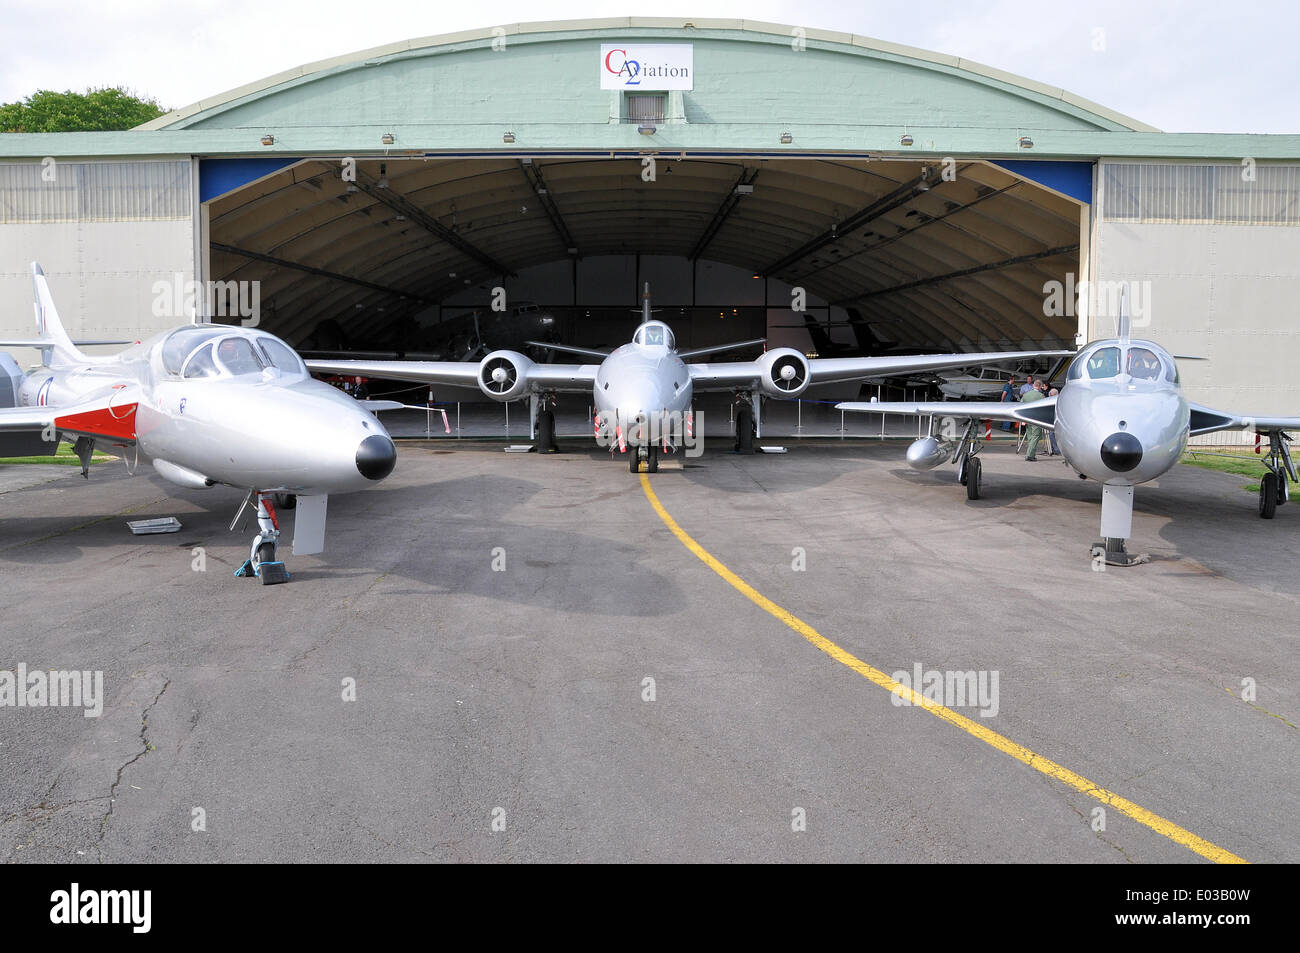 Cotswold Airport. Canberra and Hunter classic vintage jets of Midair Squadron civilian jet display team. Ex RAF aircraft. C2 Aviation hangar Stock Photo